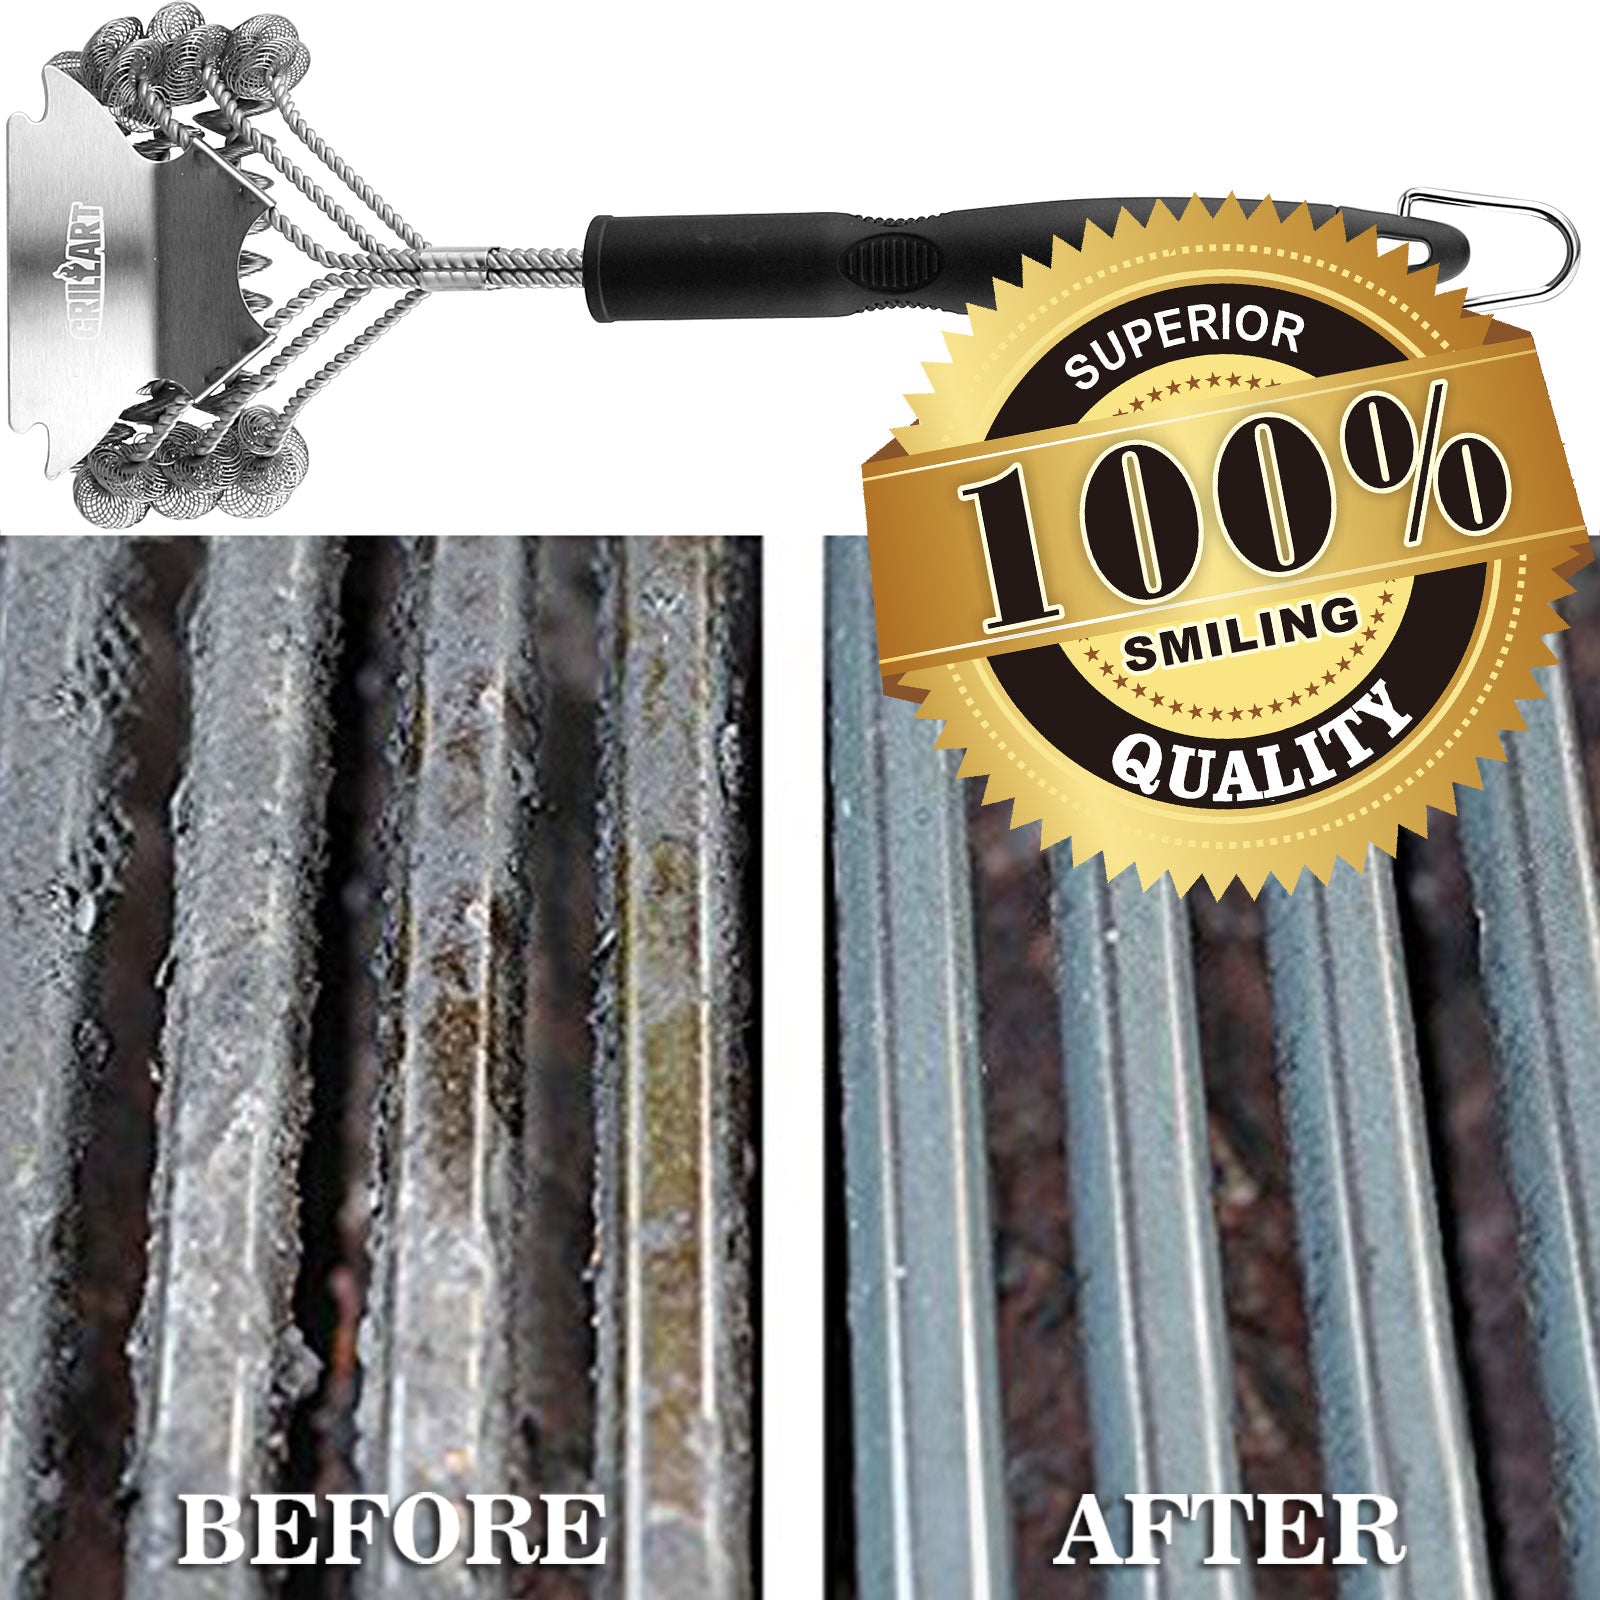 Grill Brush and Scraper Bristle Free – Safe BBQ Brush for Grill Stainless  Grill Grate Cleaner - Safe Grill Accessories for Porcelain/Weber